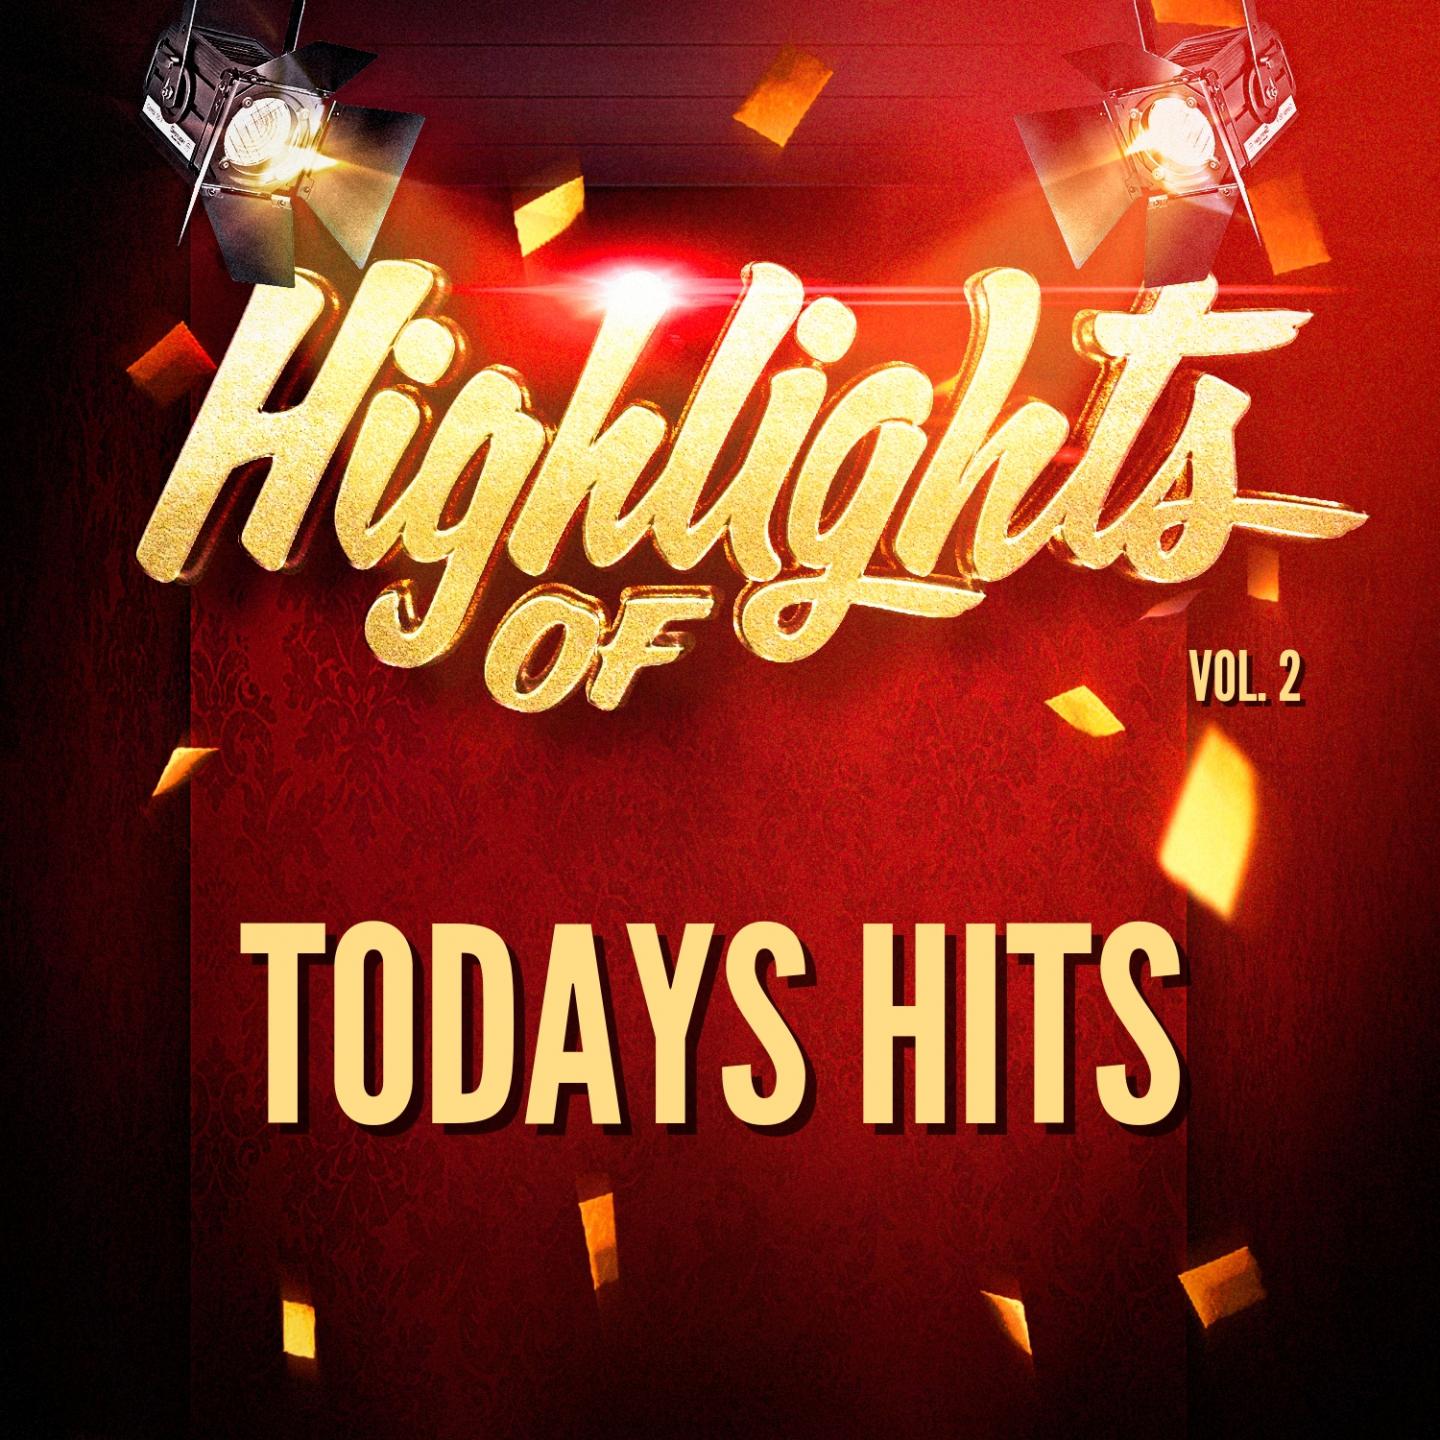 Highlights of Todays Hits, Vol. 2